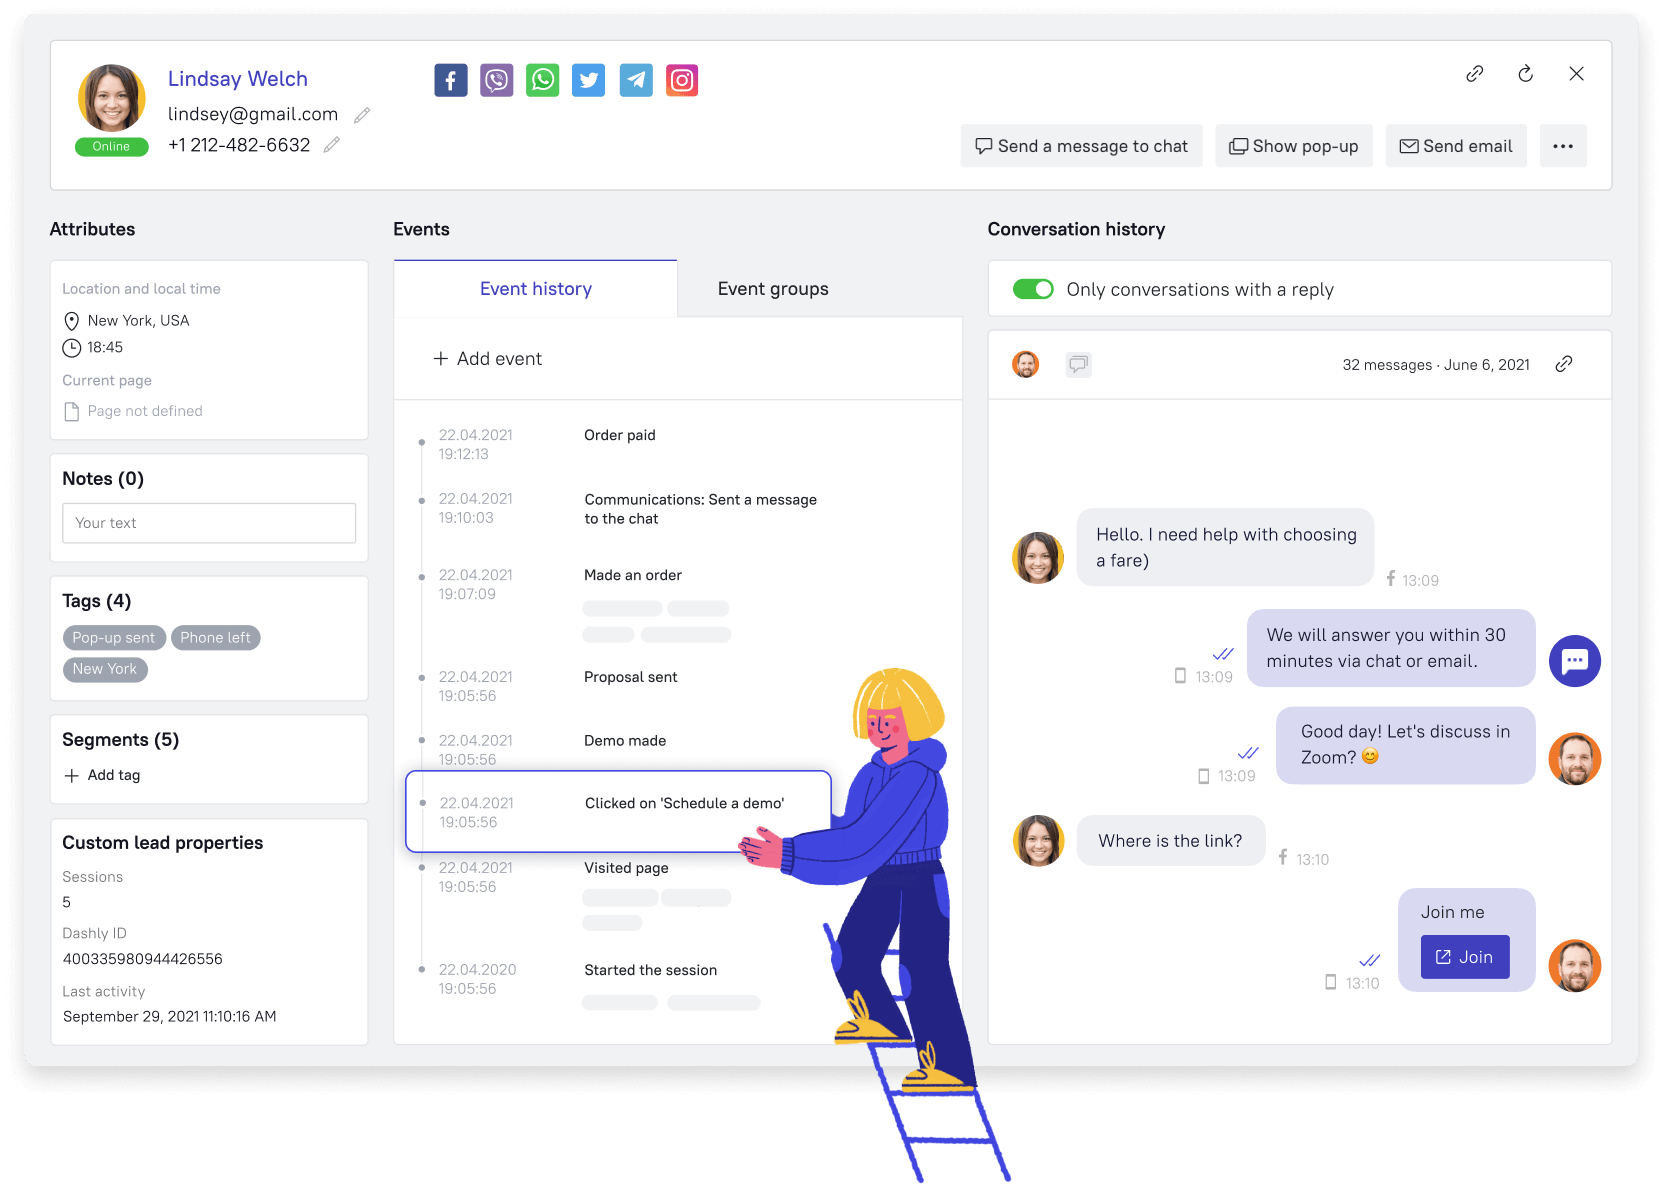 Updates to Our Online Chat System